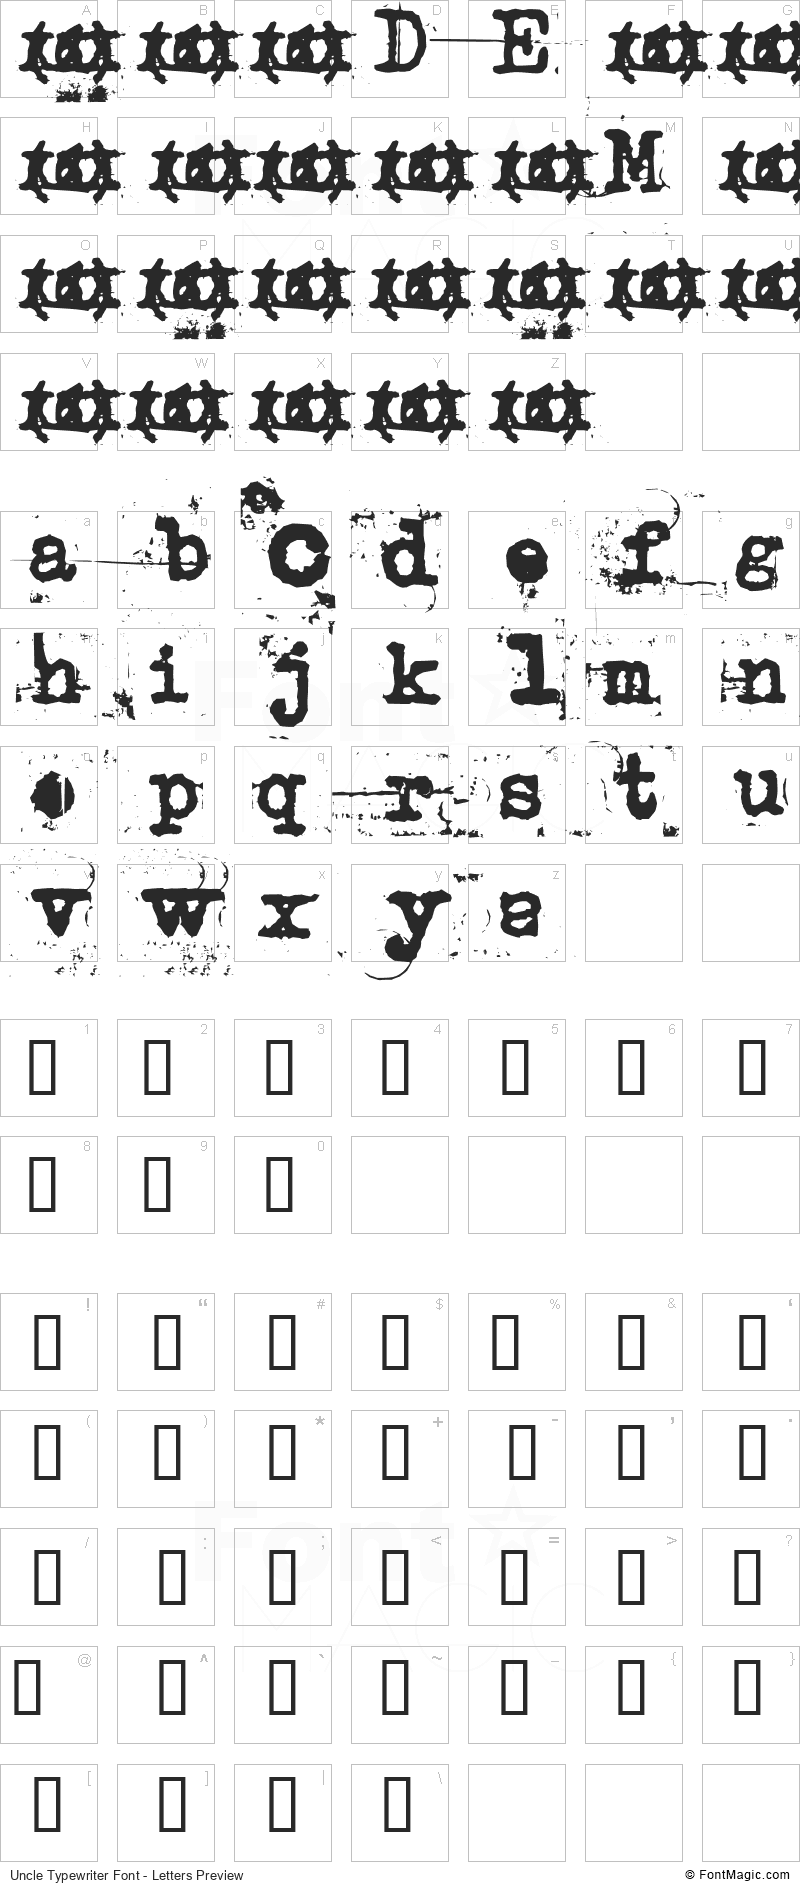 Uncle Typewriter Font - All Latters Preview Chart